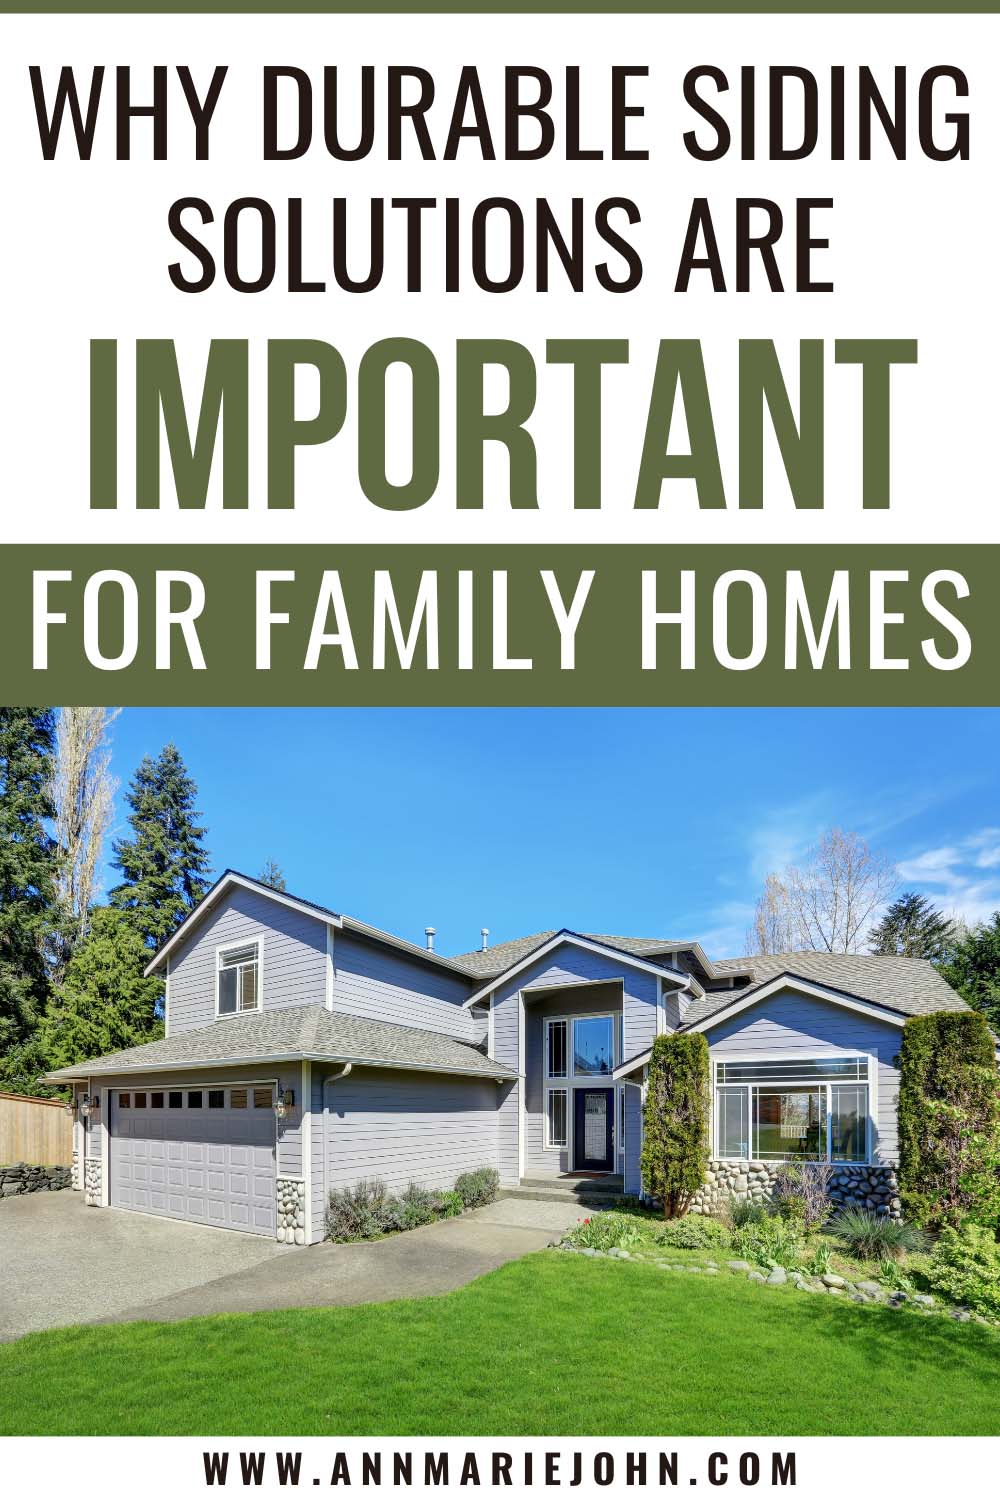 Why Durable Siding Solutions Are Important for Family Homes